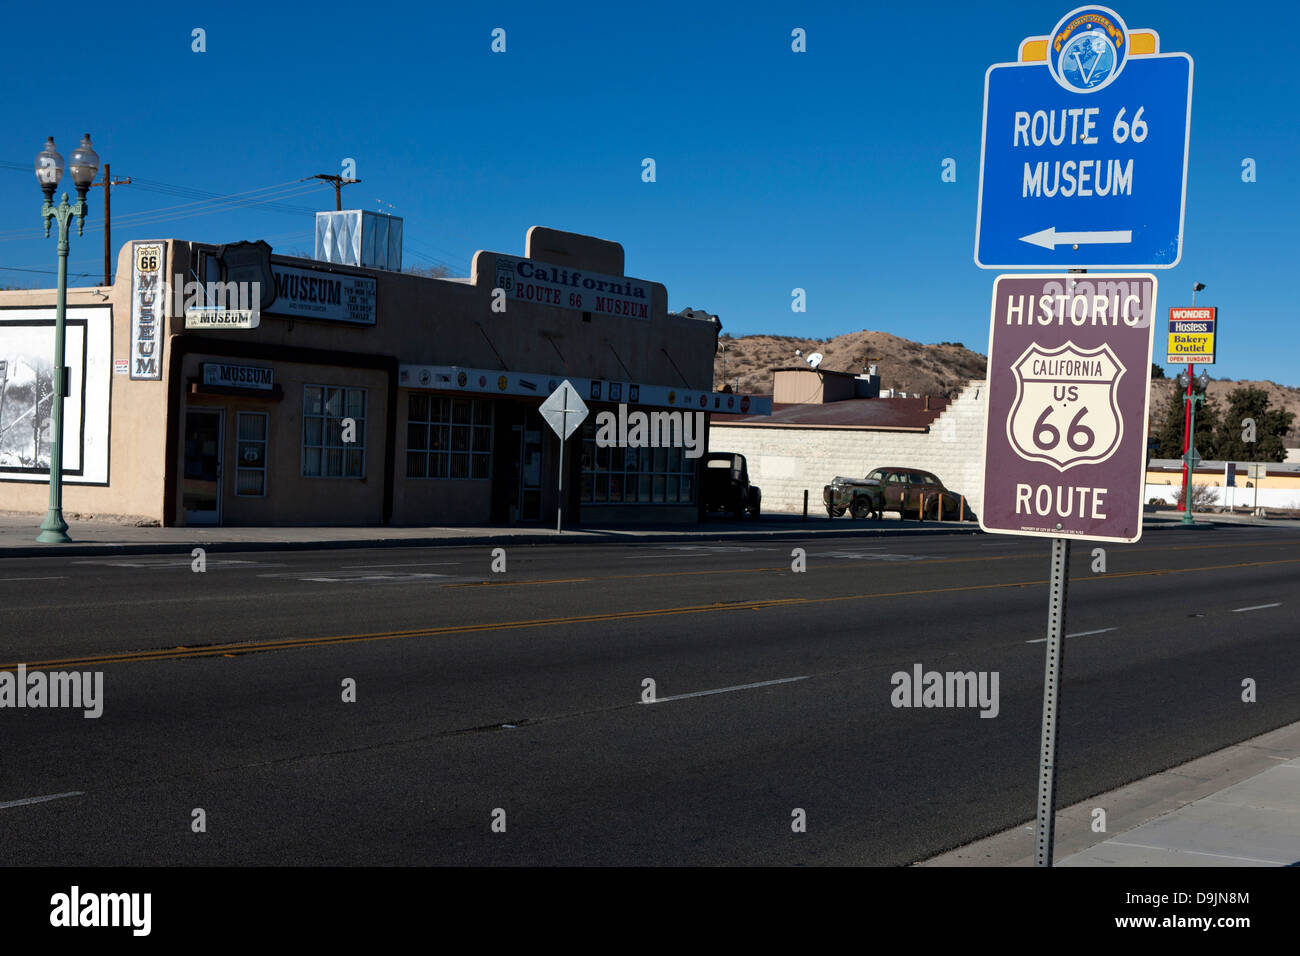 Historic Route 66 sign opposite of the Route 66 Museum, Victorville, California, United States of America Stock Photo